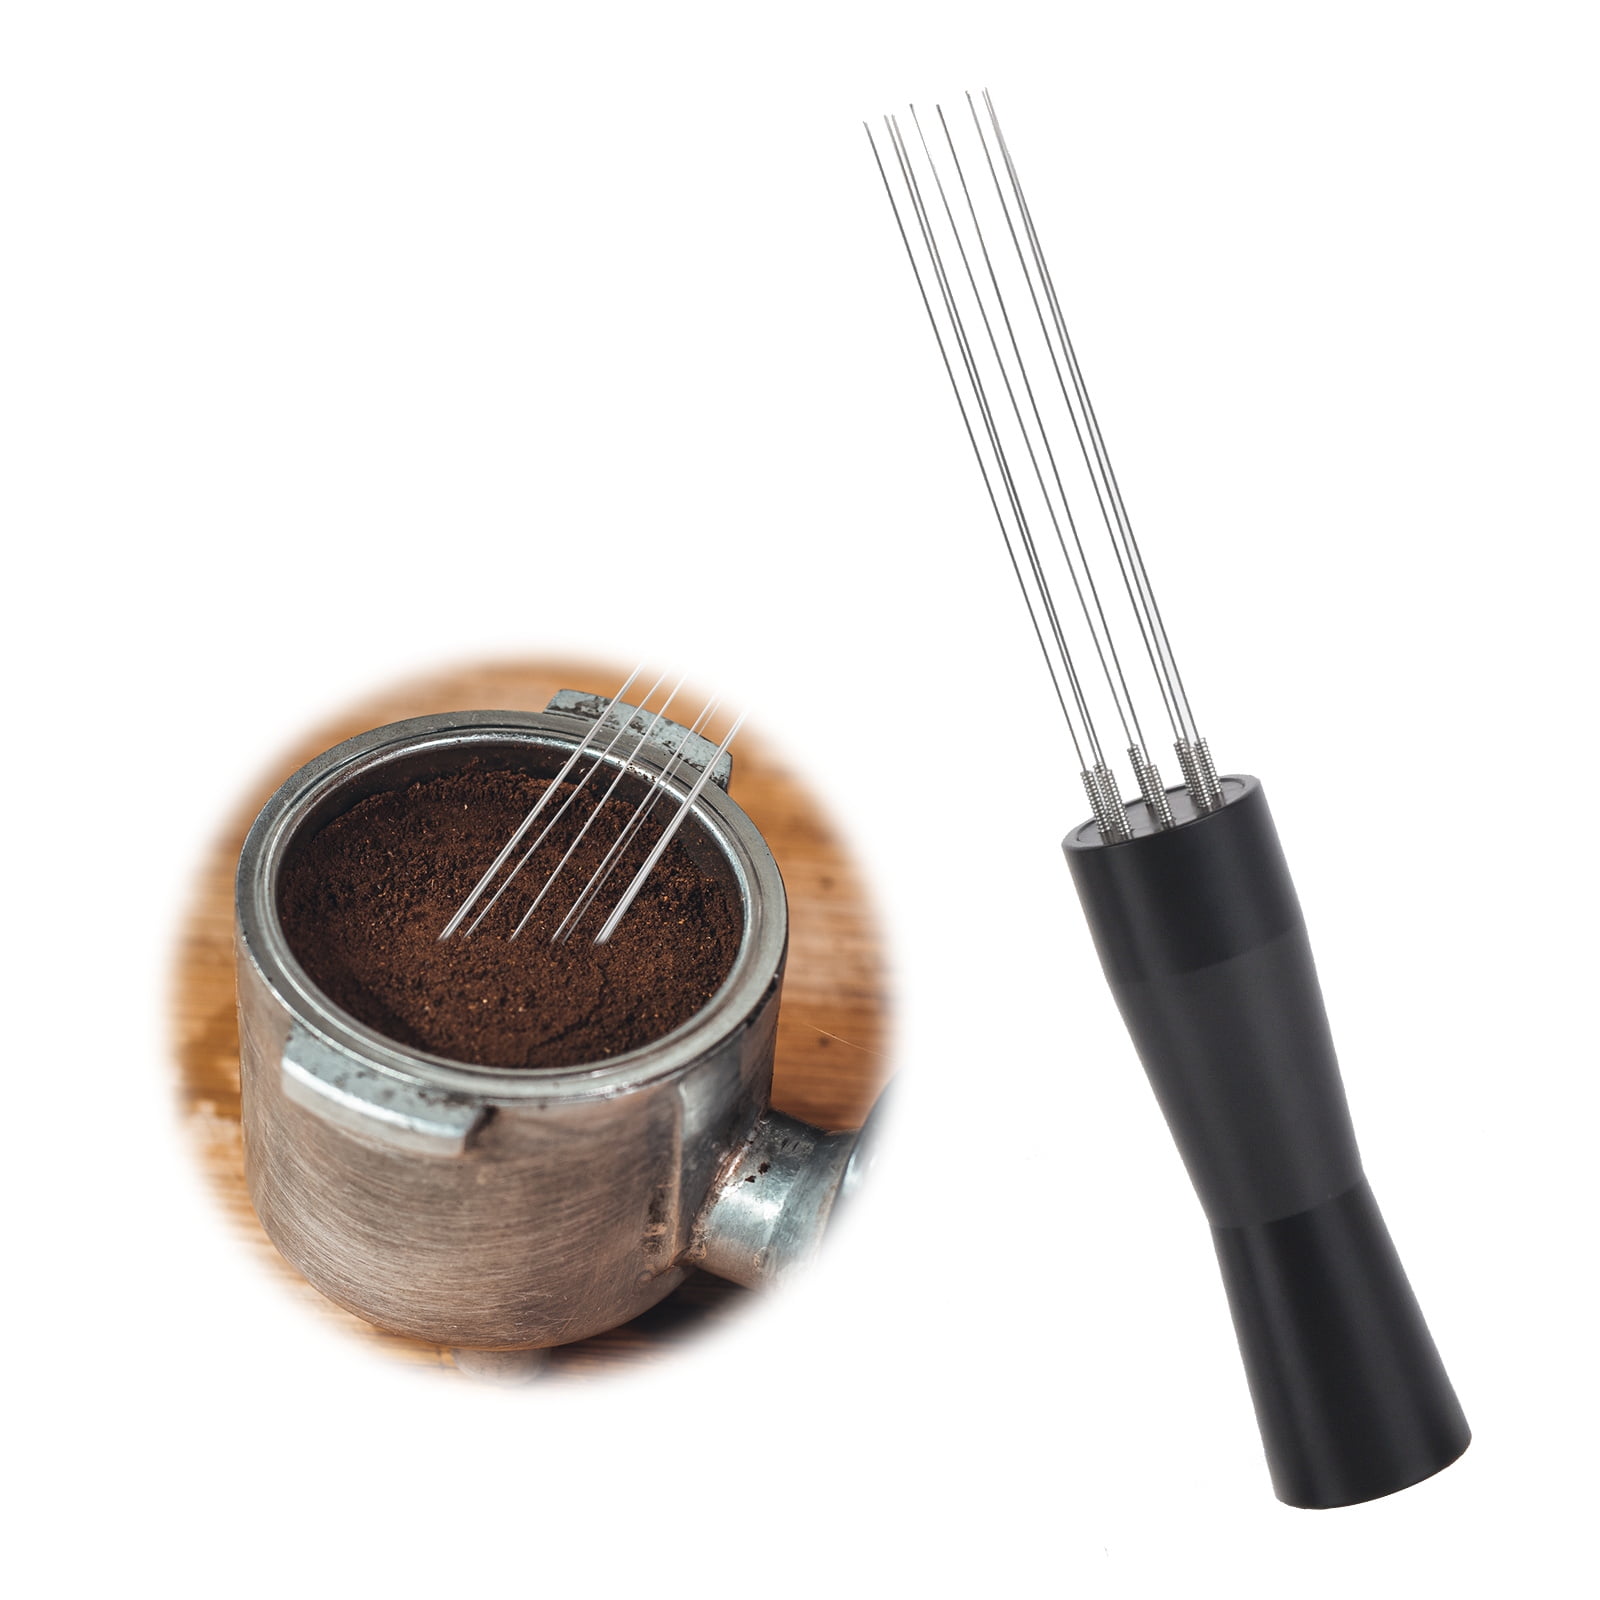 Multi-functional Coffee Tamper and 7-Needles WDT Coffee Stirrer Tool- Espresso Tamp Press. 2-in-1 Espresso Distribution Stirrer Tool with Espresso